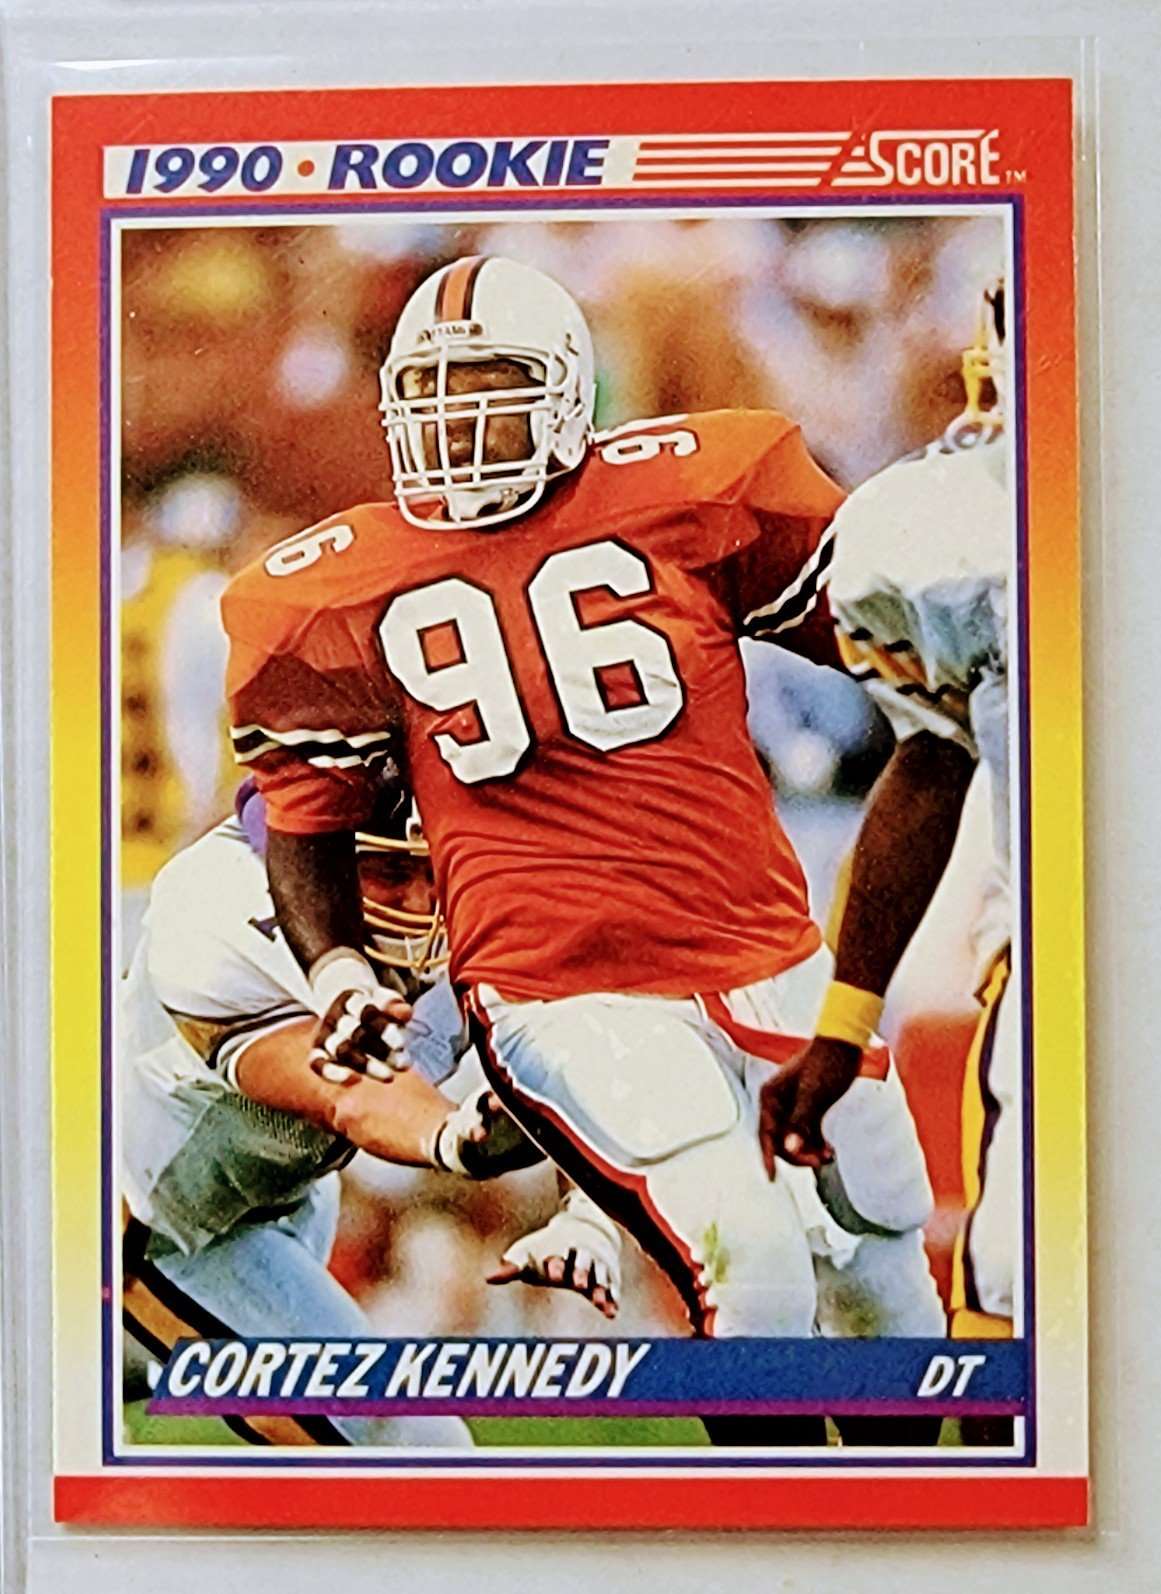 1990 Score Cortez Kennedy Rookie Football Card AVM1 simple Xclusive Collectibles   